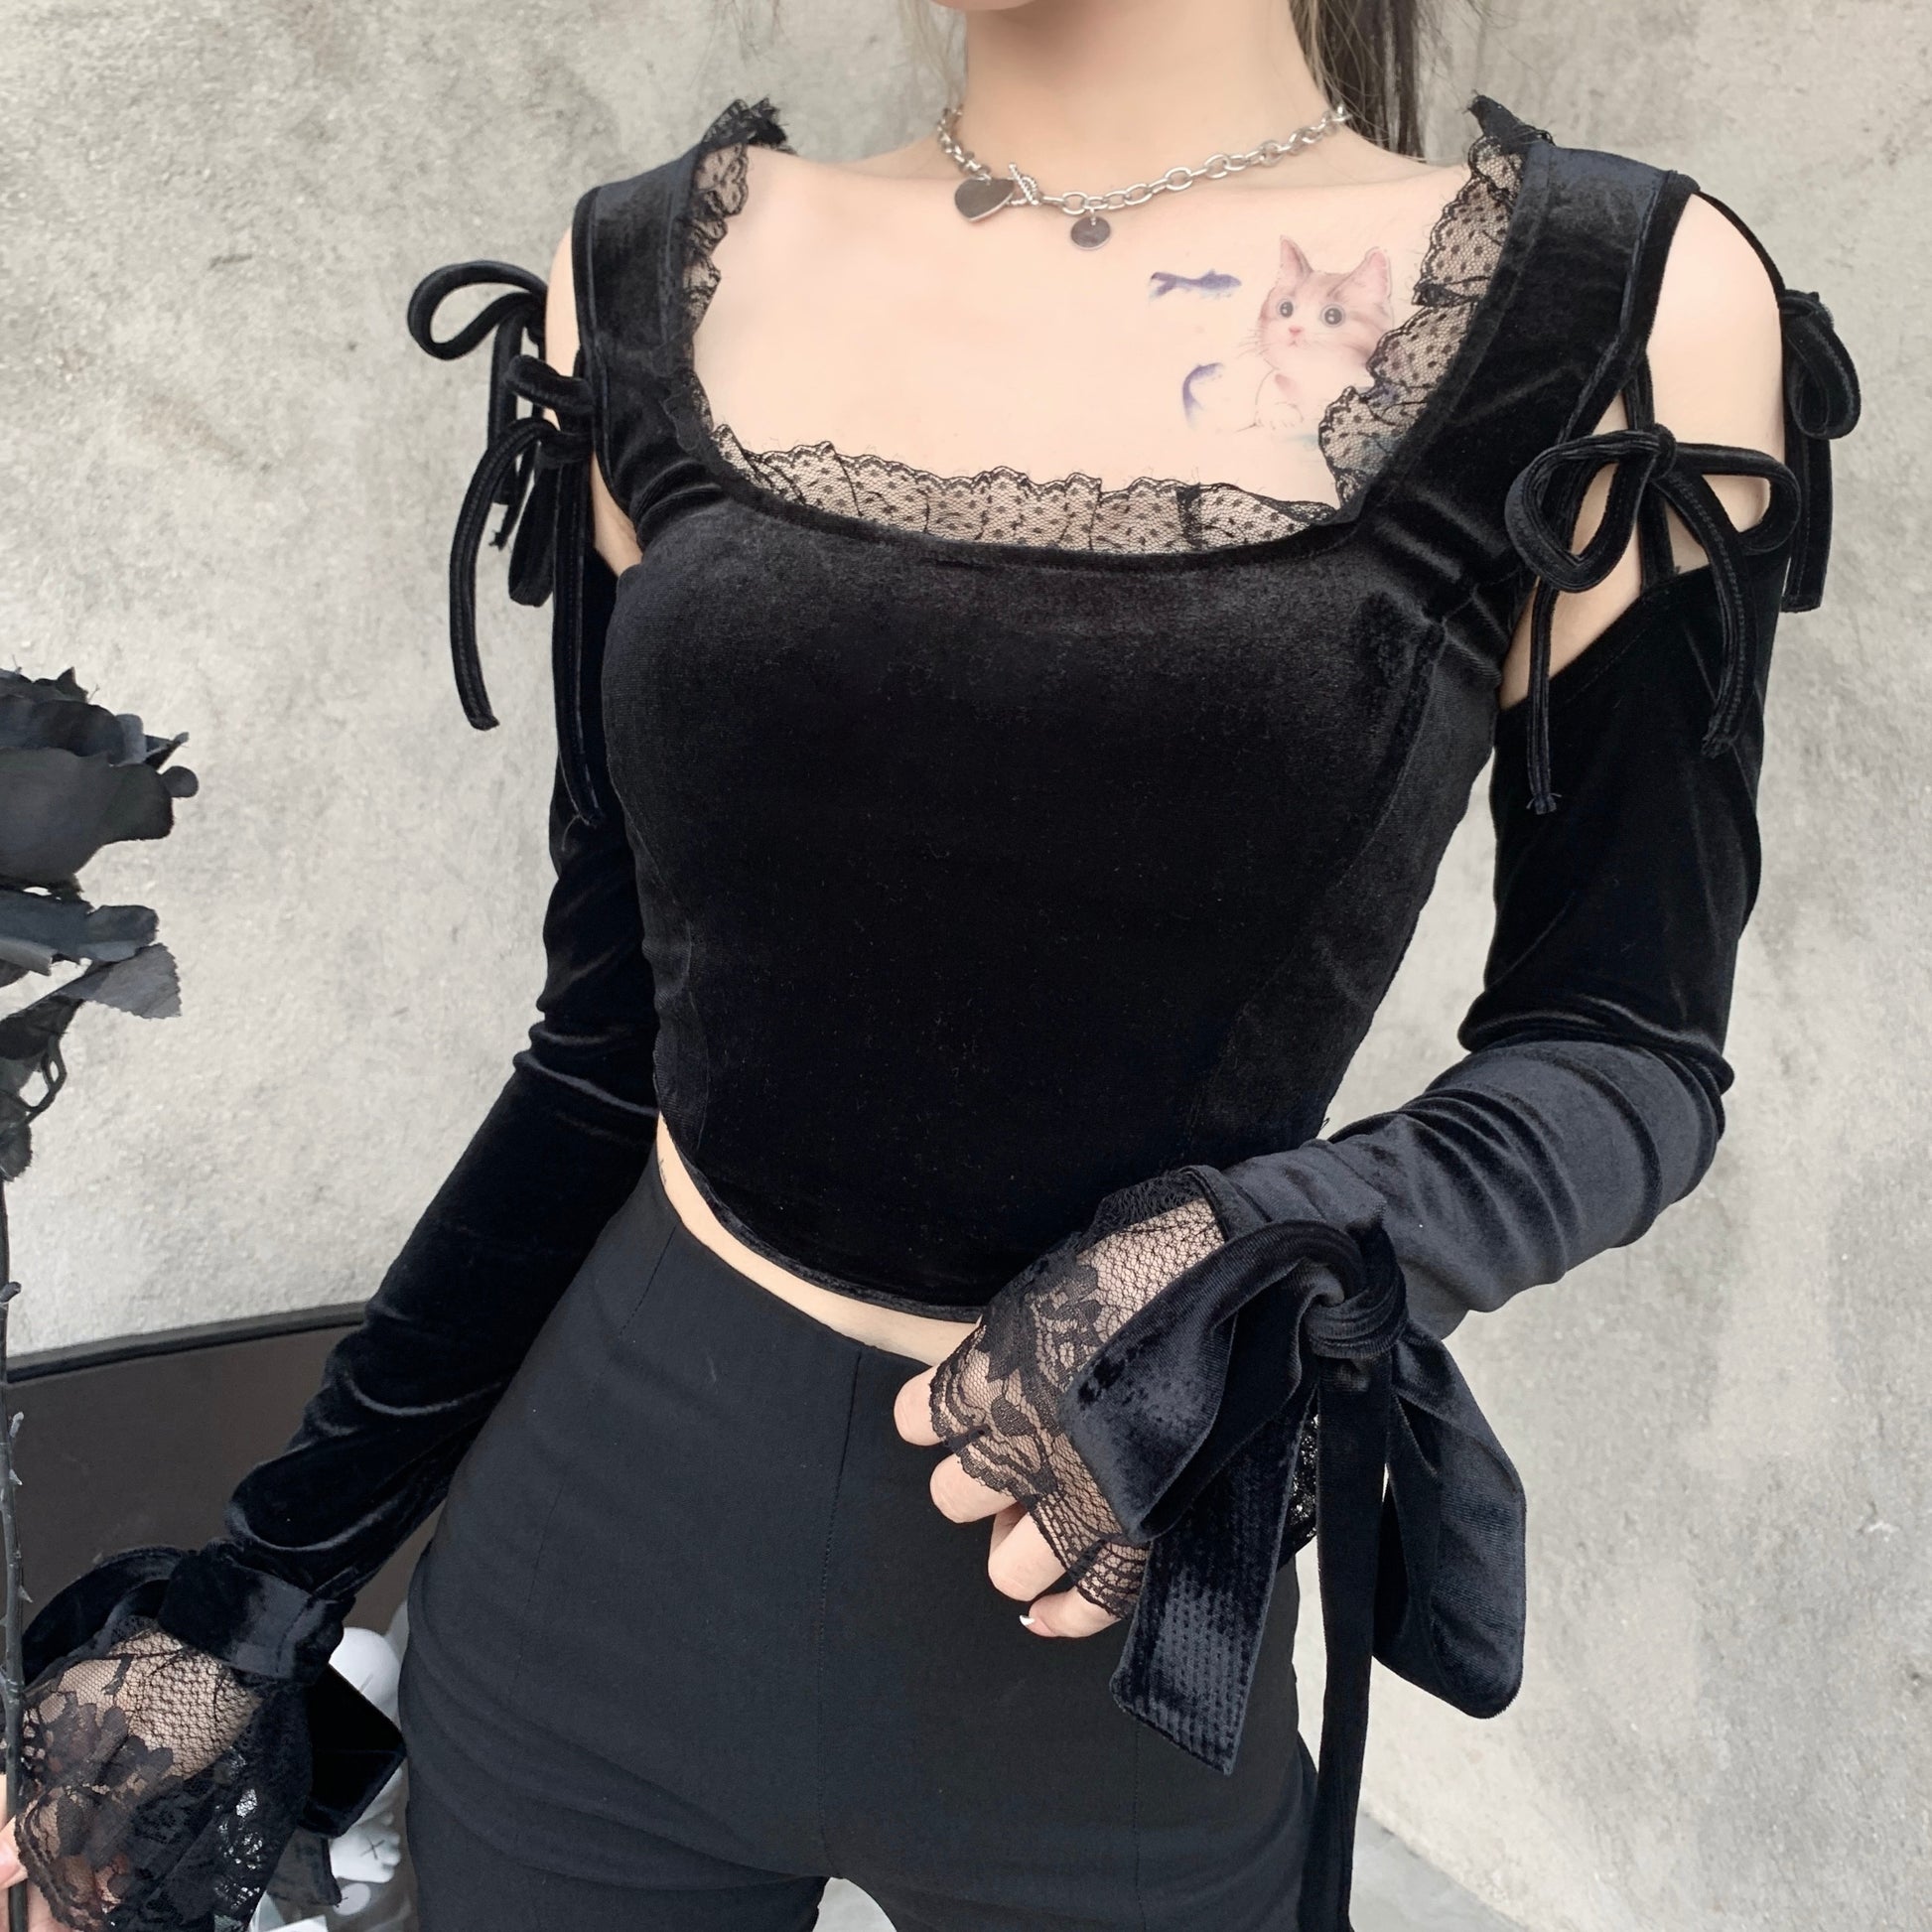 Lace Black Crop Top Goth freeshipping - Chagothic